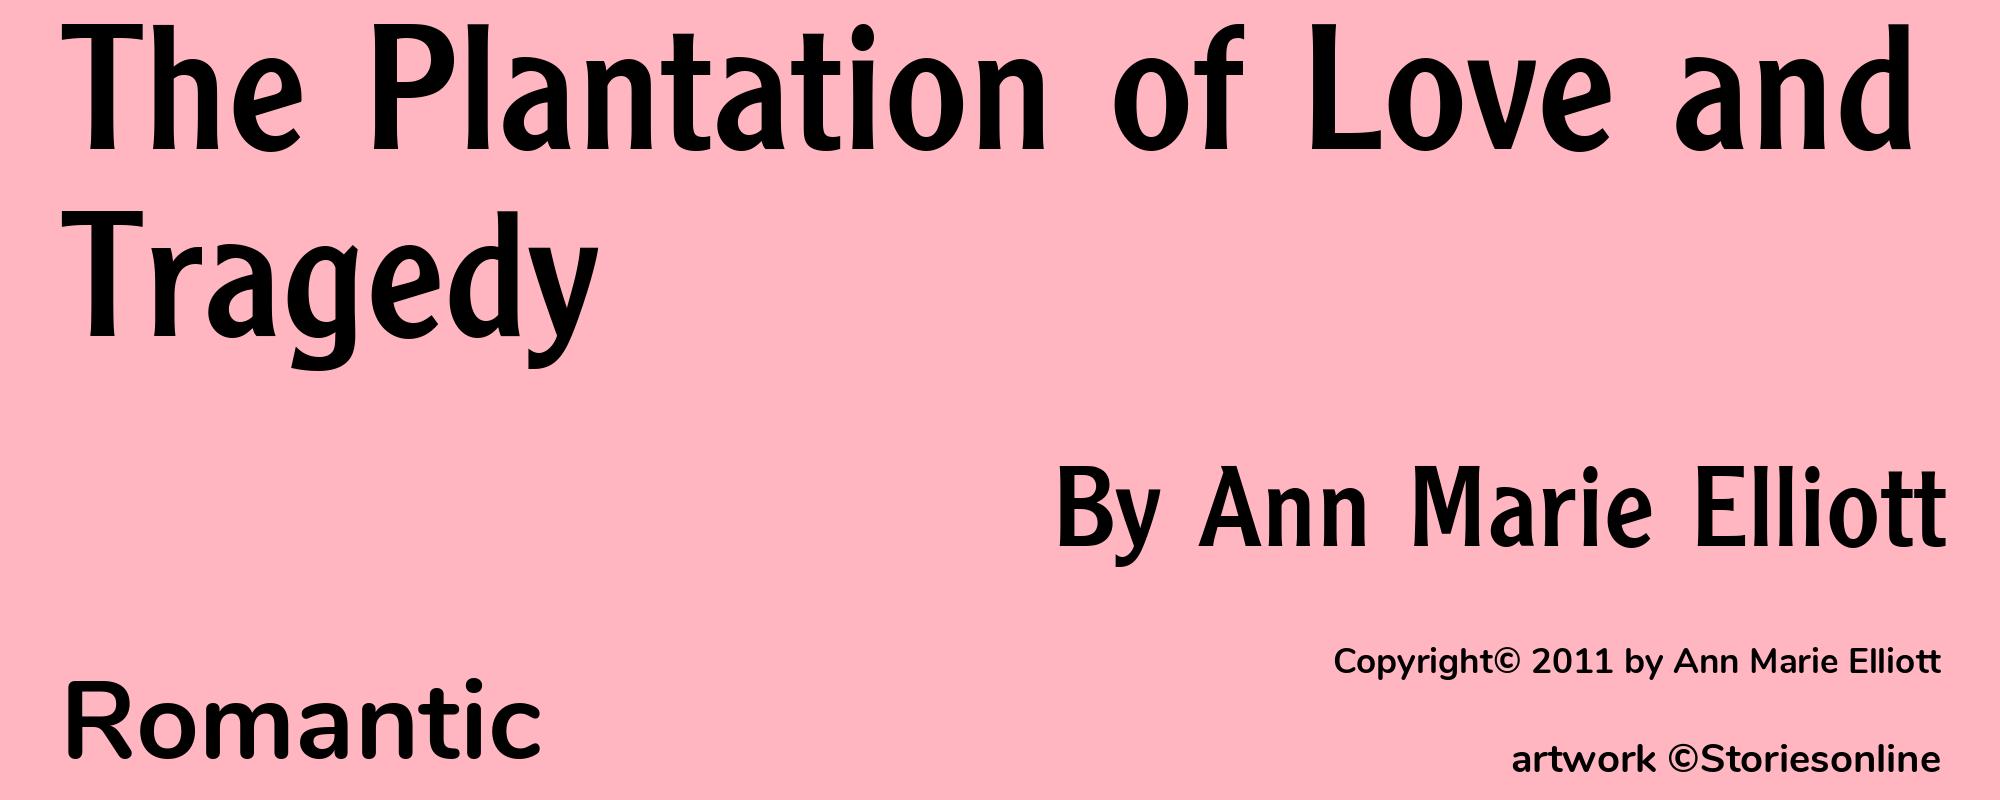 The Plantation of Love and Tragedy - Cover